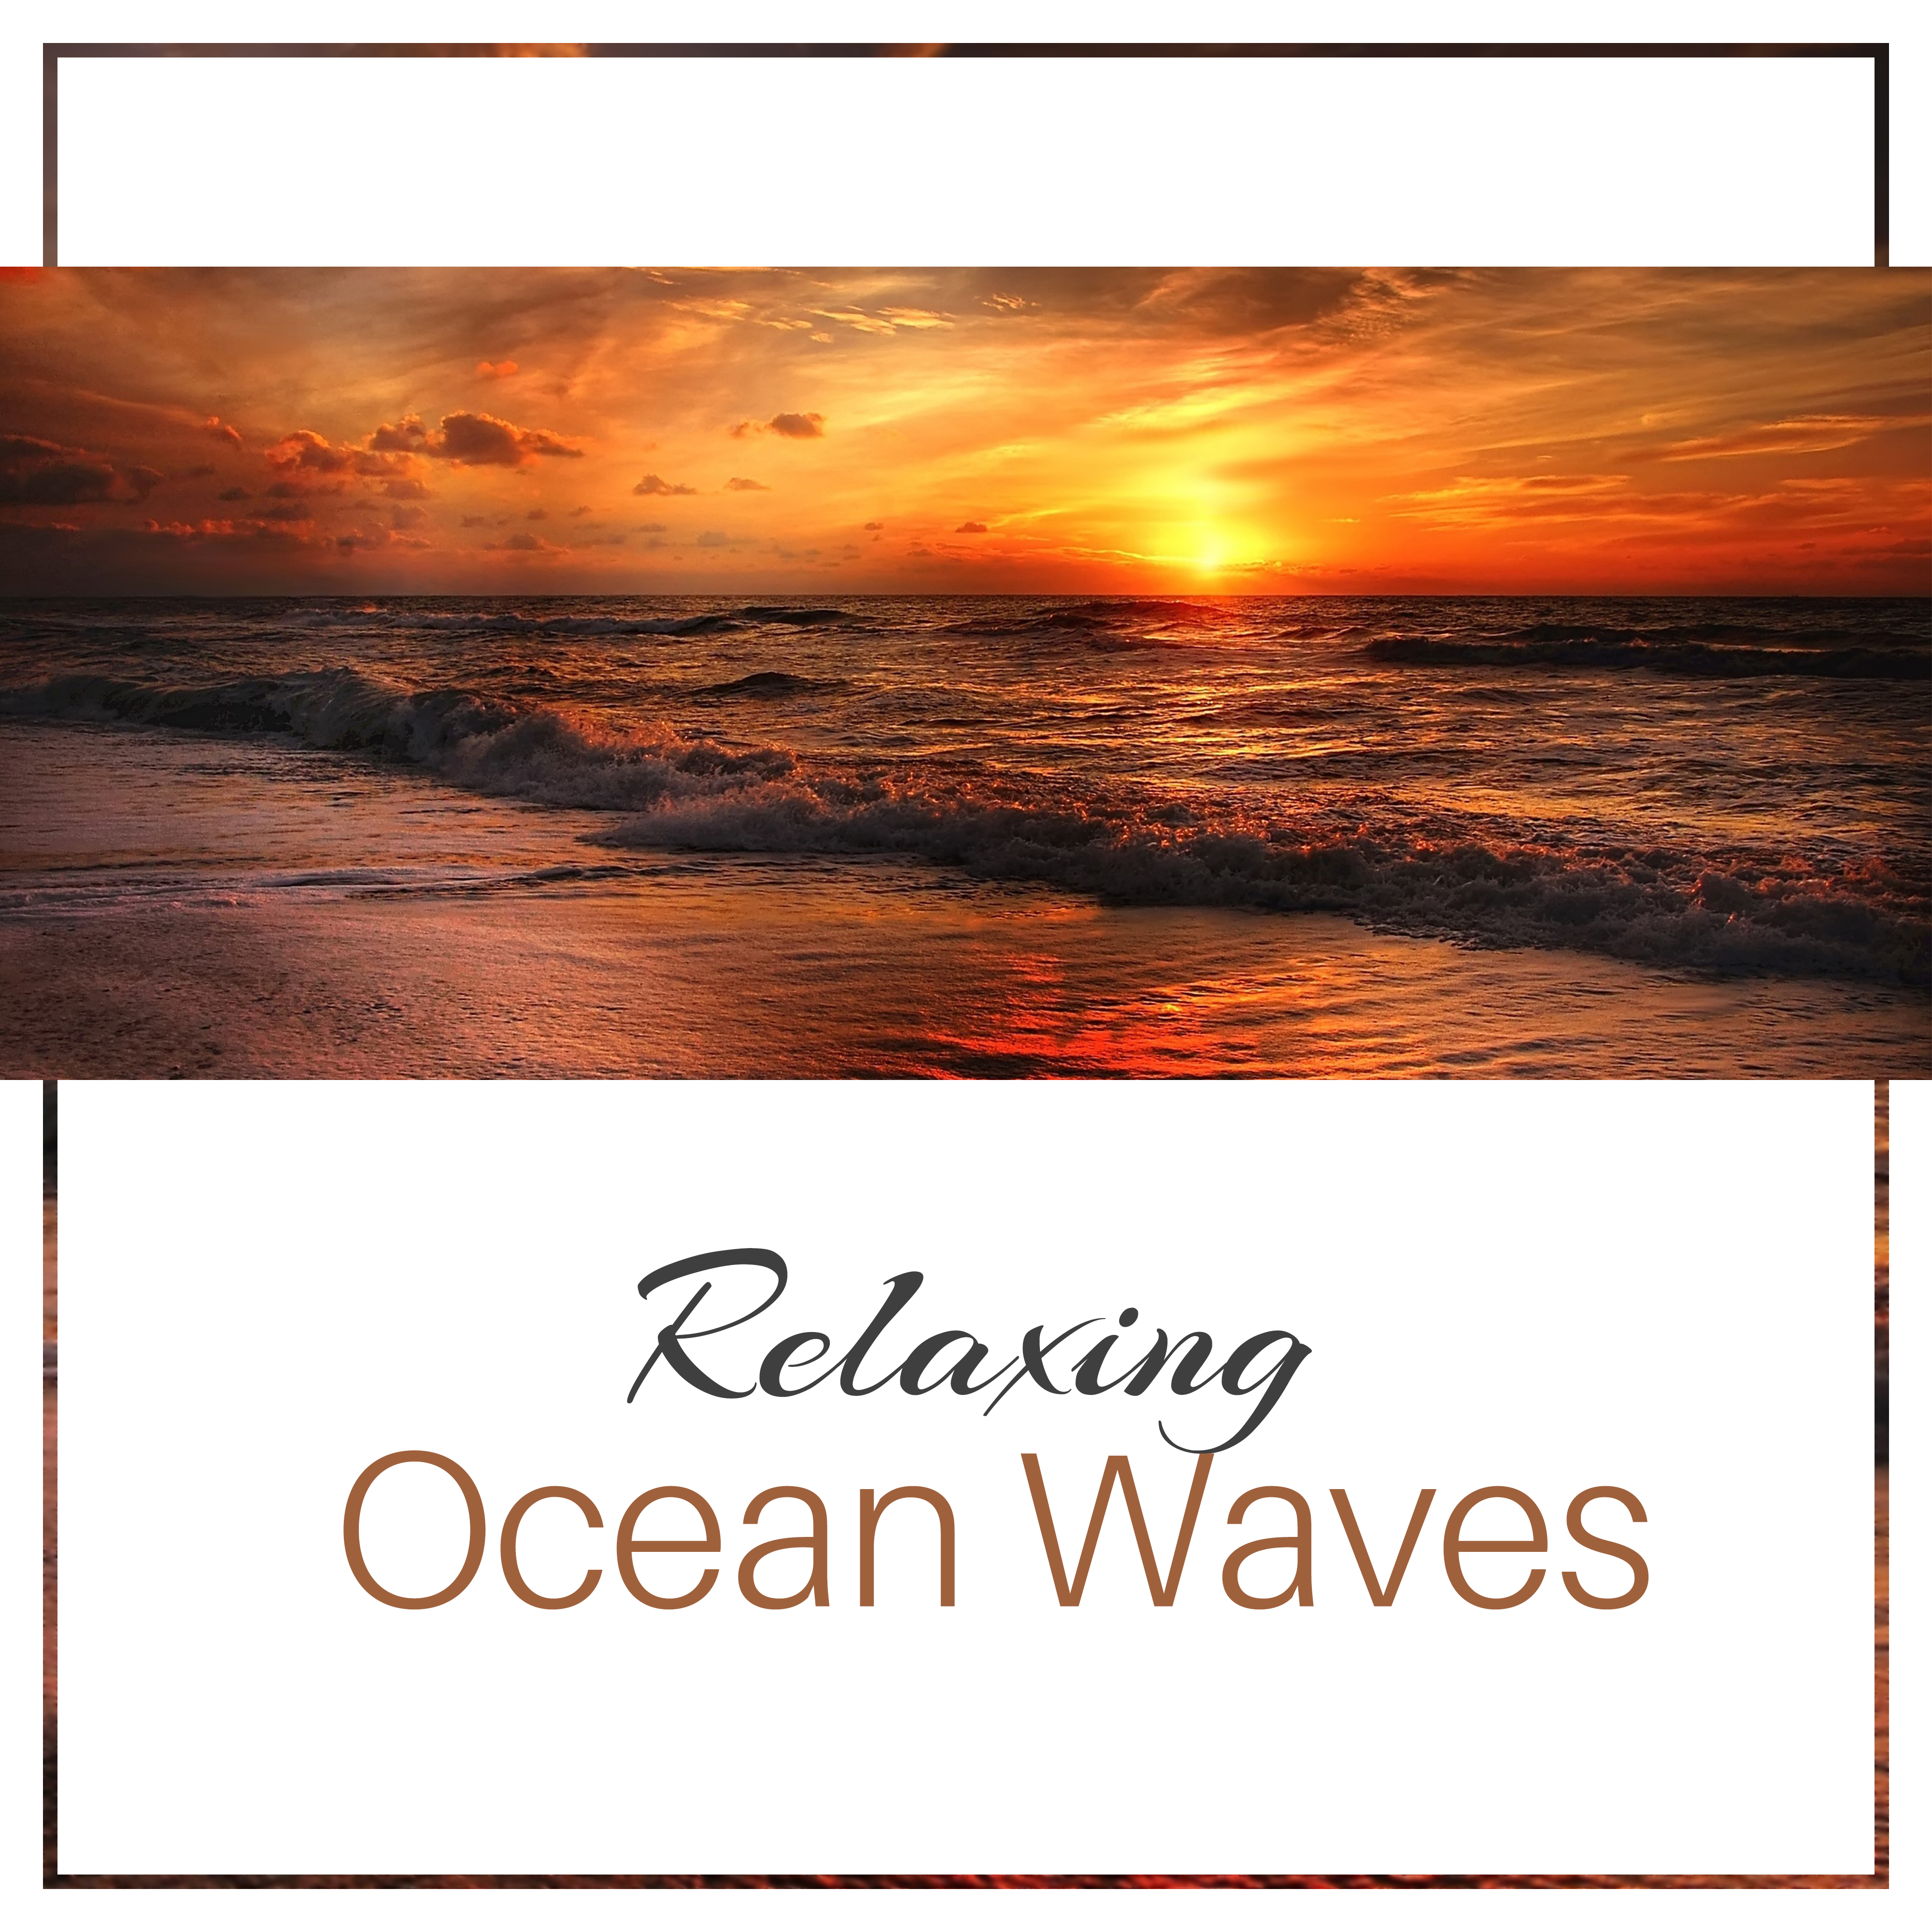 Relaxing Ocean Waves  Calm Sea Sounds, Water Relaxation, Music for Peaceful Spirit, Mind Rest